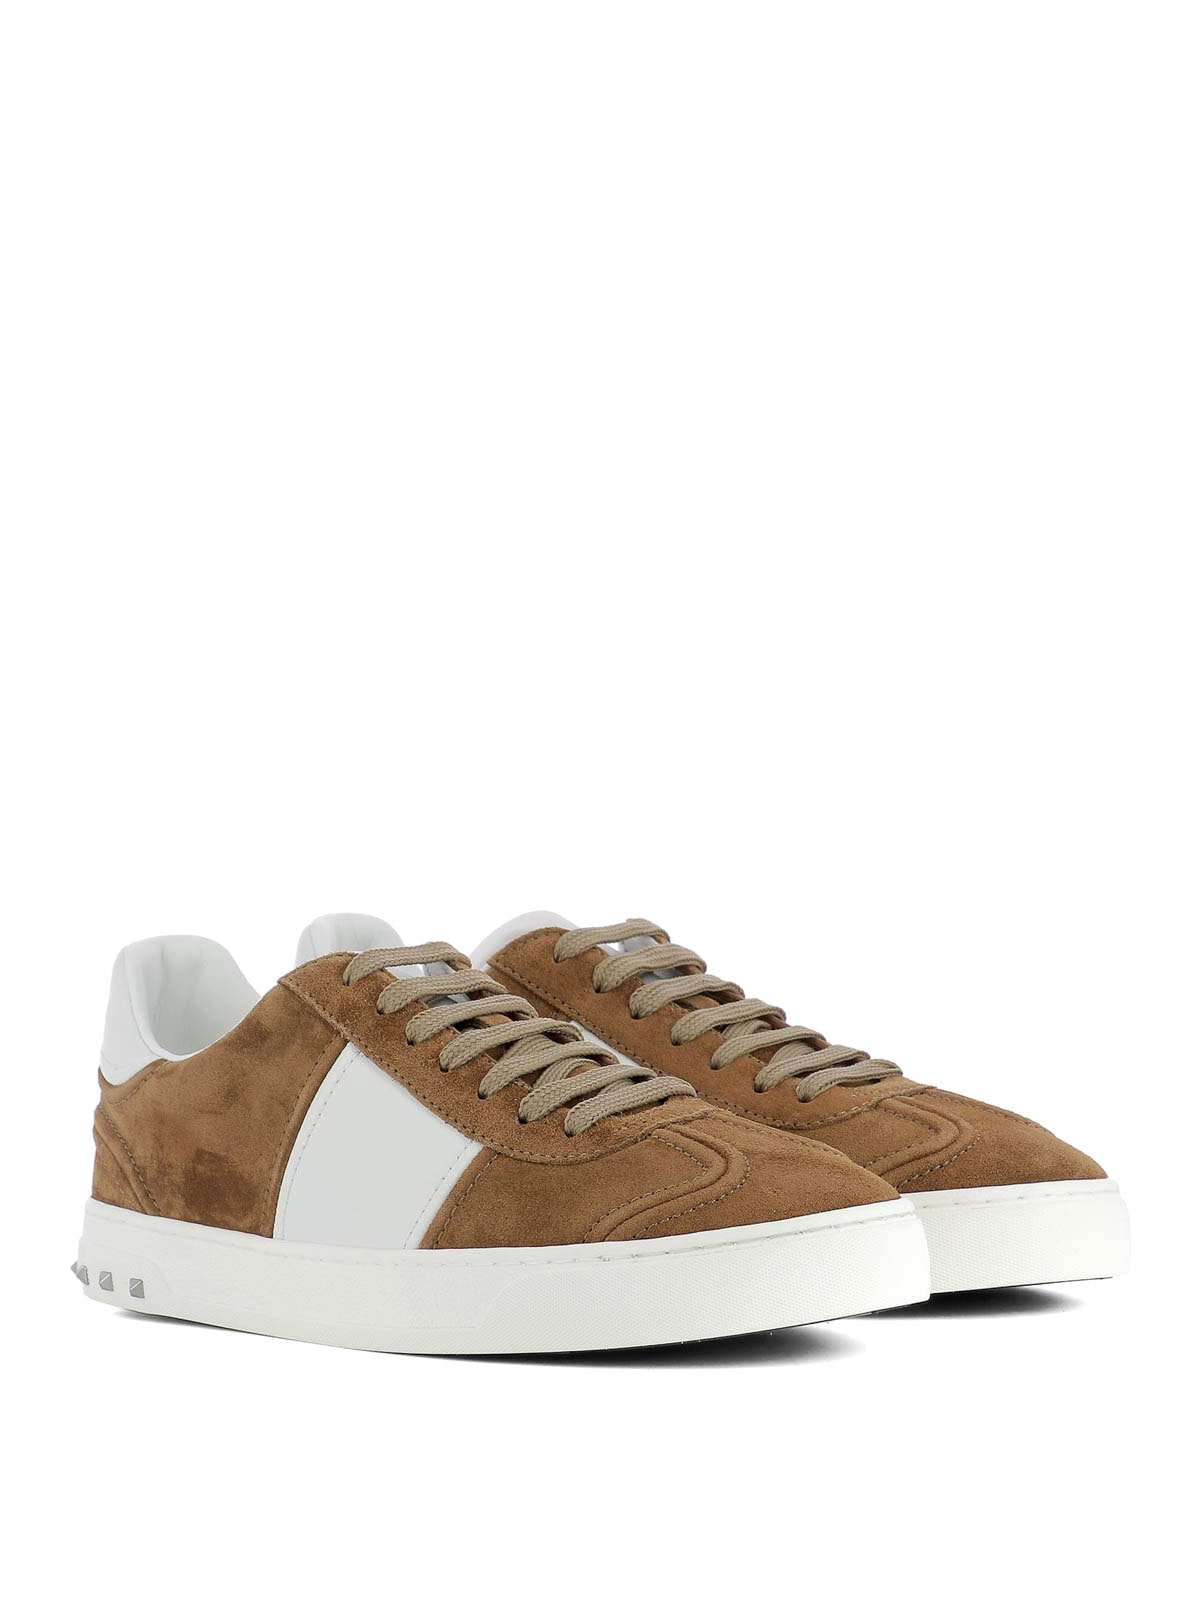 Buy Valentino Garavani Grey Valentino Garavani Low-top Upvillage Sneakers  in Calf Leather for Men in UAE | Ounass